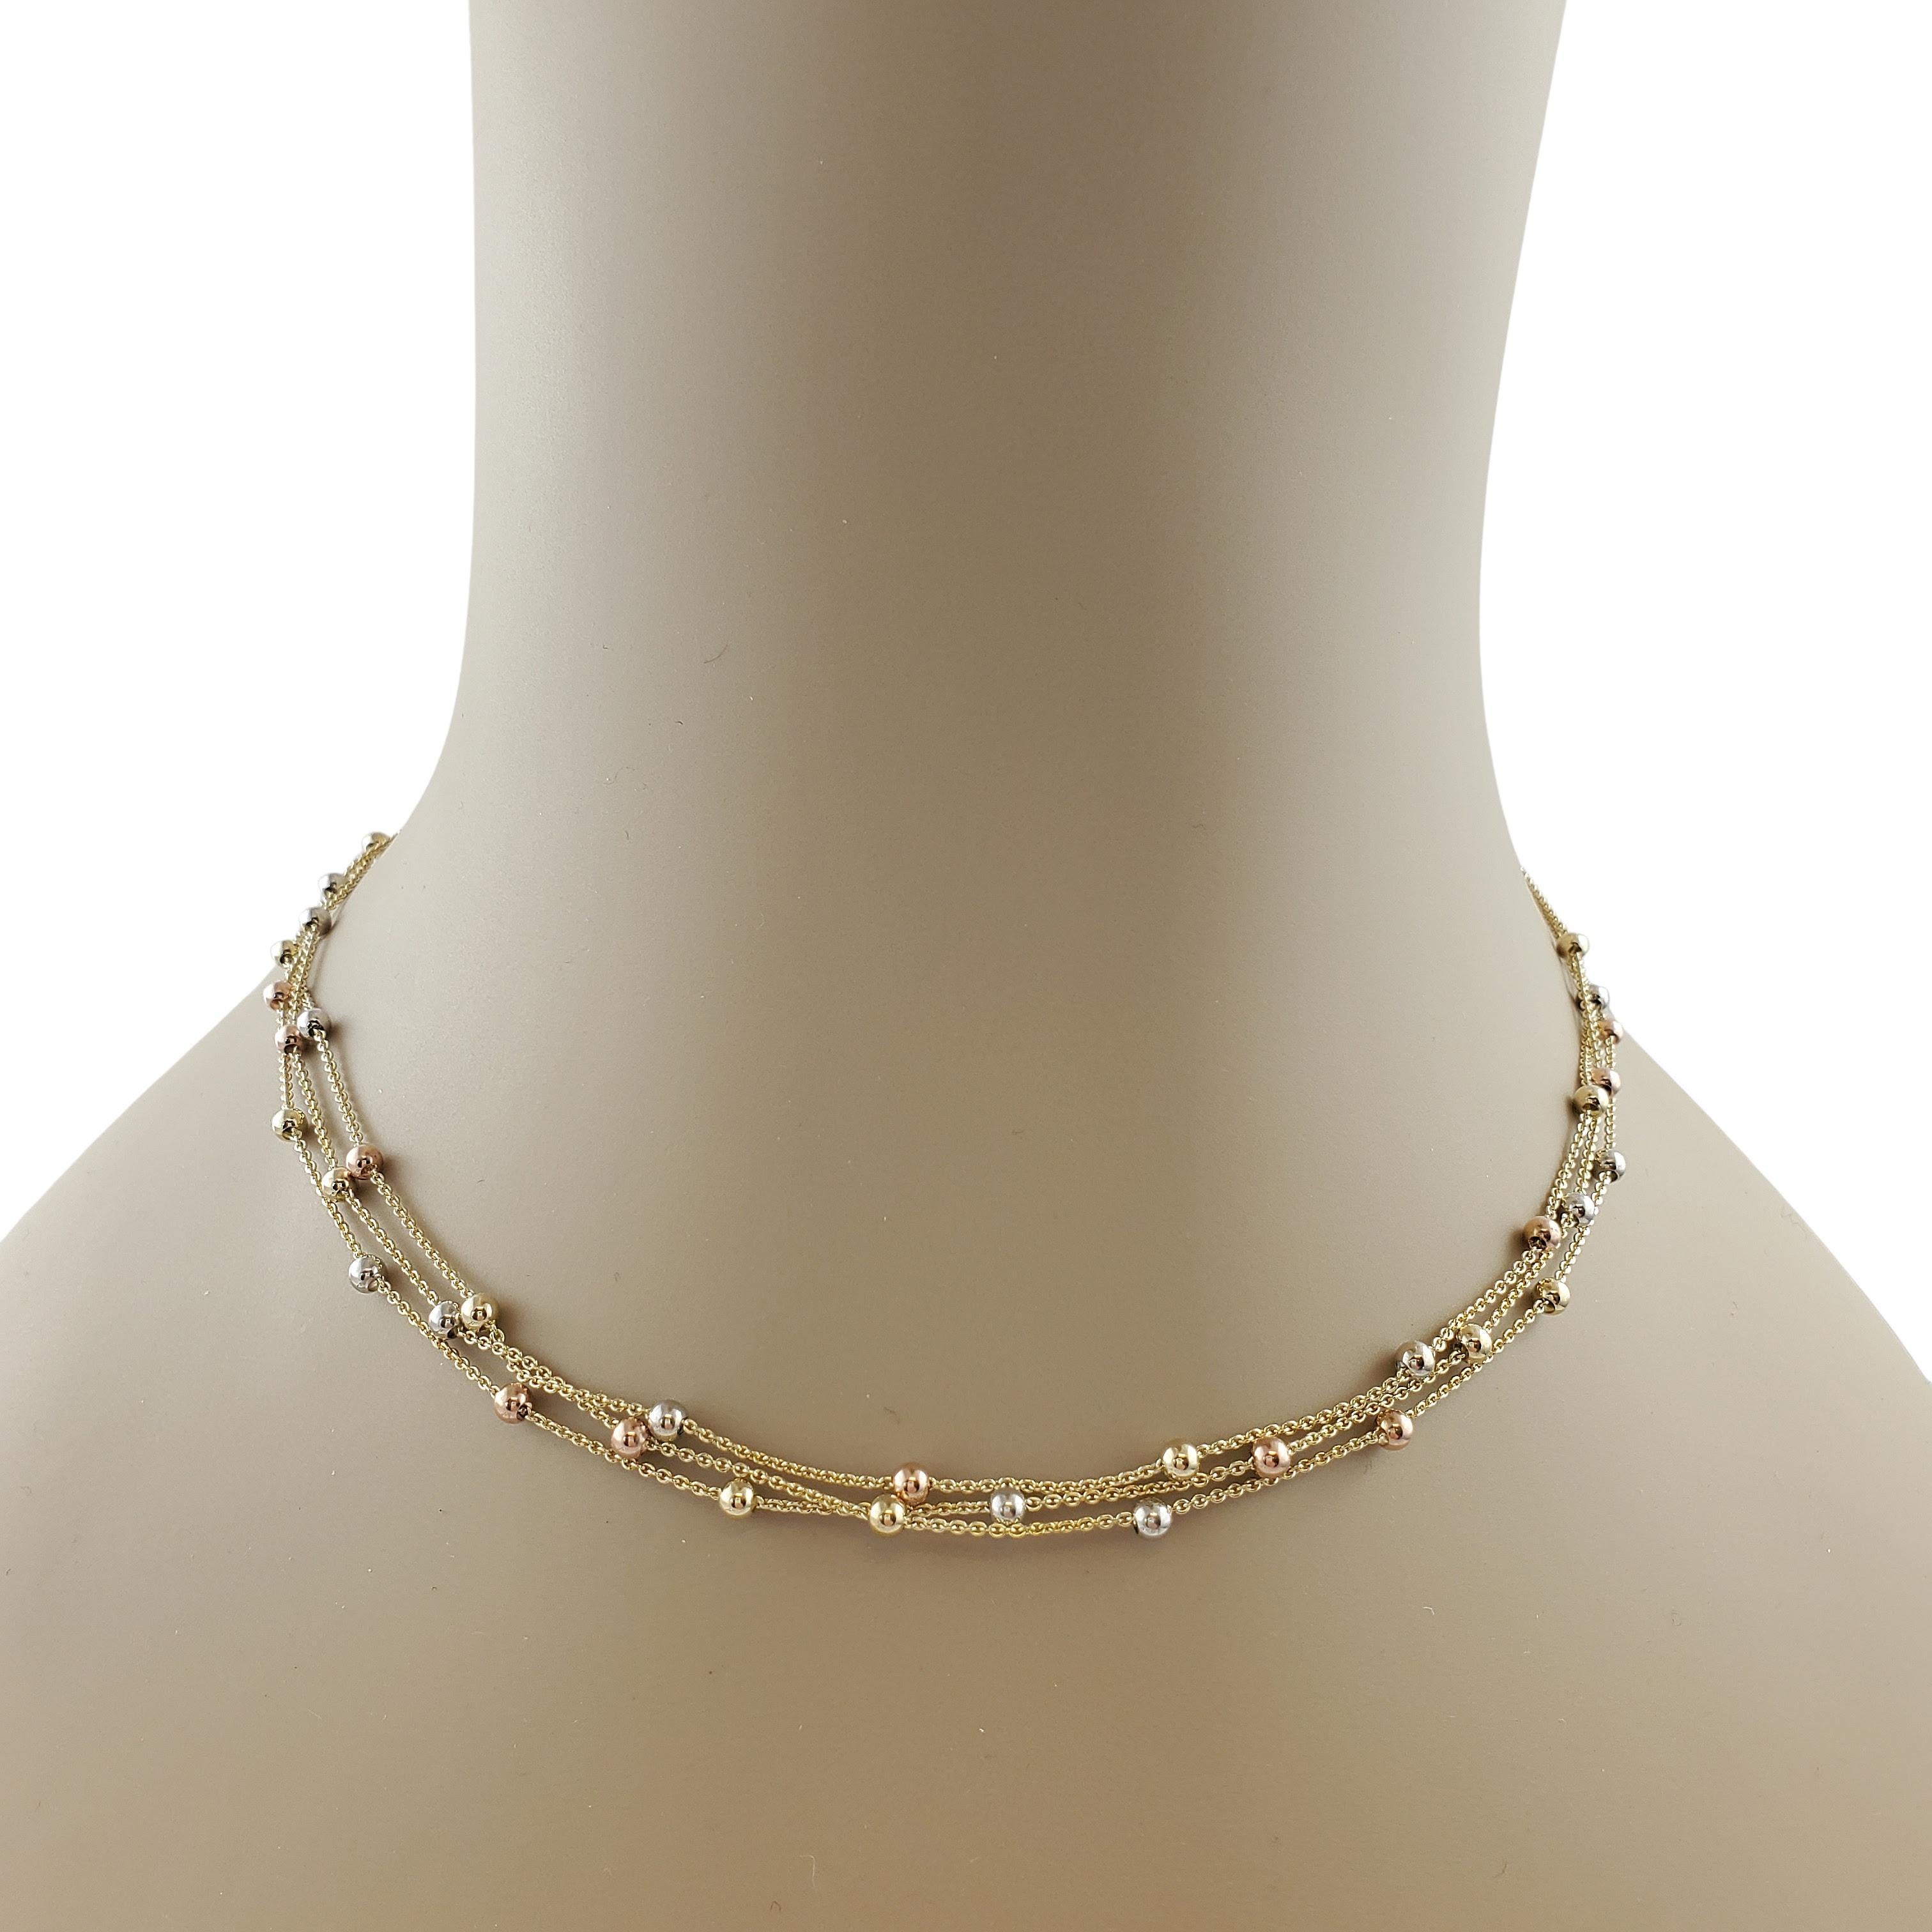 14K Yellow Gold 3 Chain Necklace with Beads For Sale 1